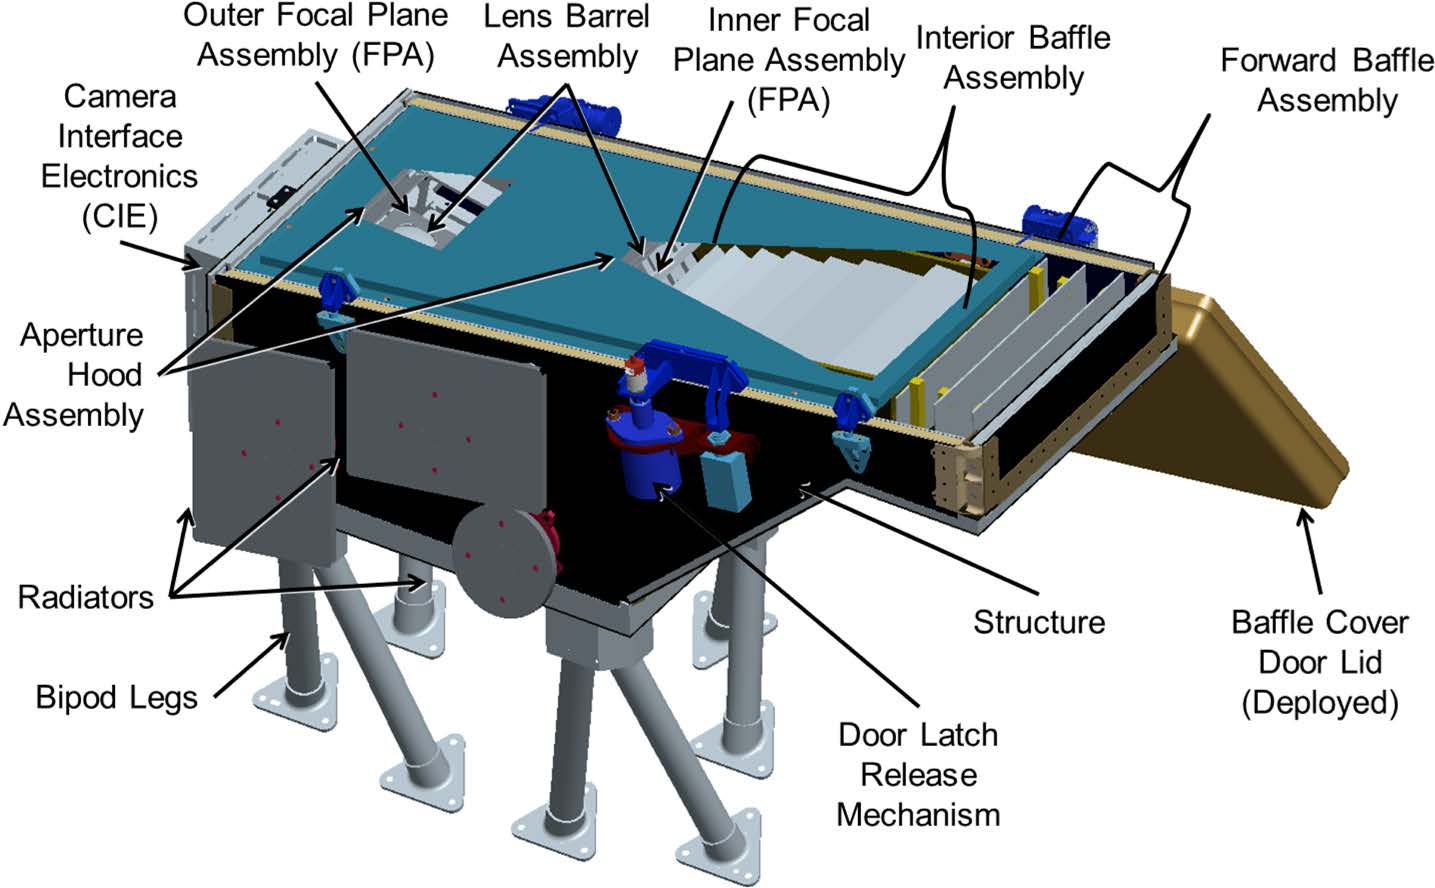 The WISPR Instrument Module (WIM) and its subassemblies. Two telescopes cover the WISPR FOV: the Inner and Outer telescope. Three baffle systems (Forward, Interior, and Aperture Hood) provide stray light control. The CIE controls the two APS detectors and is described in Sect. 3.3.1. The Door Latch release is the only WISPR mechanism. Most of the subassemblies are briefly described in Sect. 3 